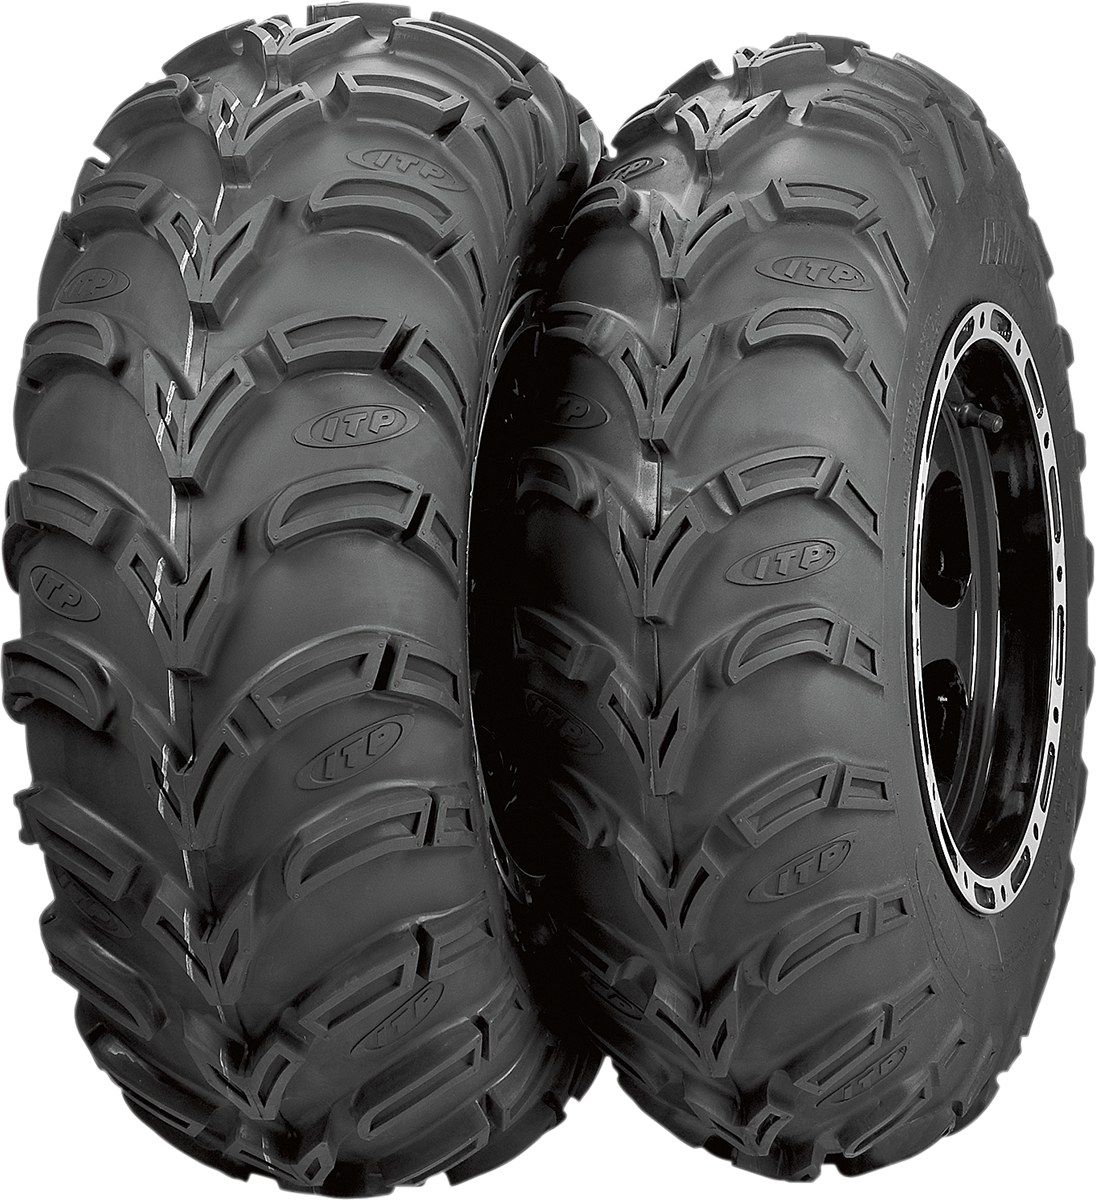 ITP Tire - Mud Lite XL - Front/Rear - 28x12-14 - 6 Ply 560495